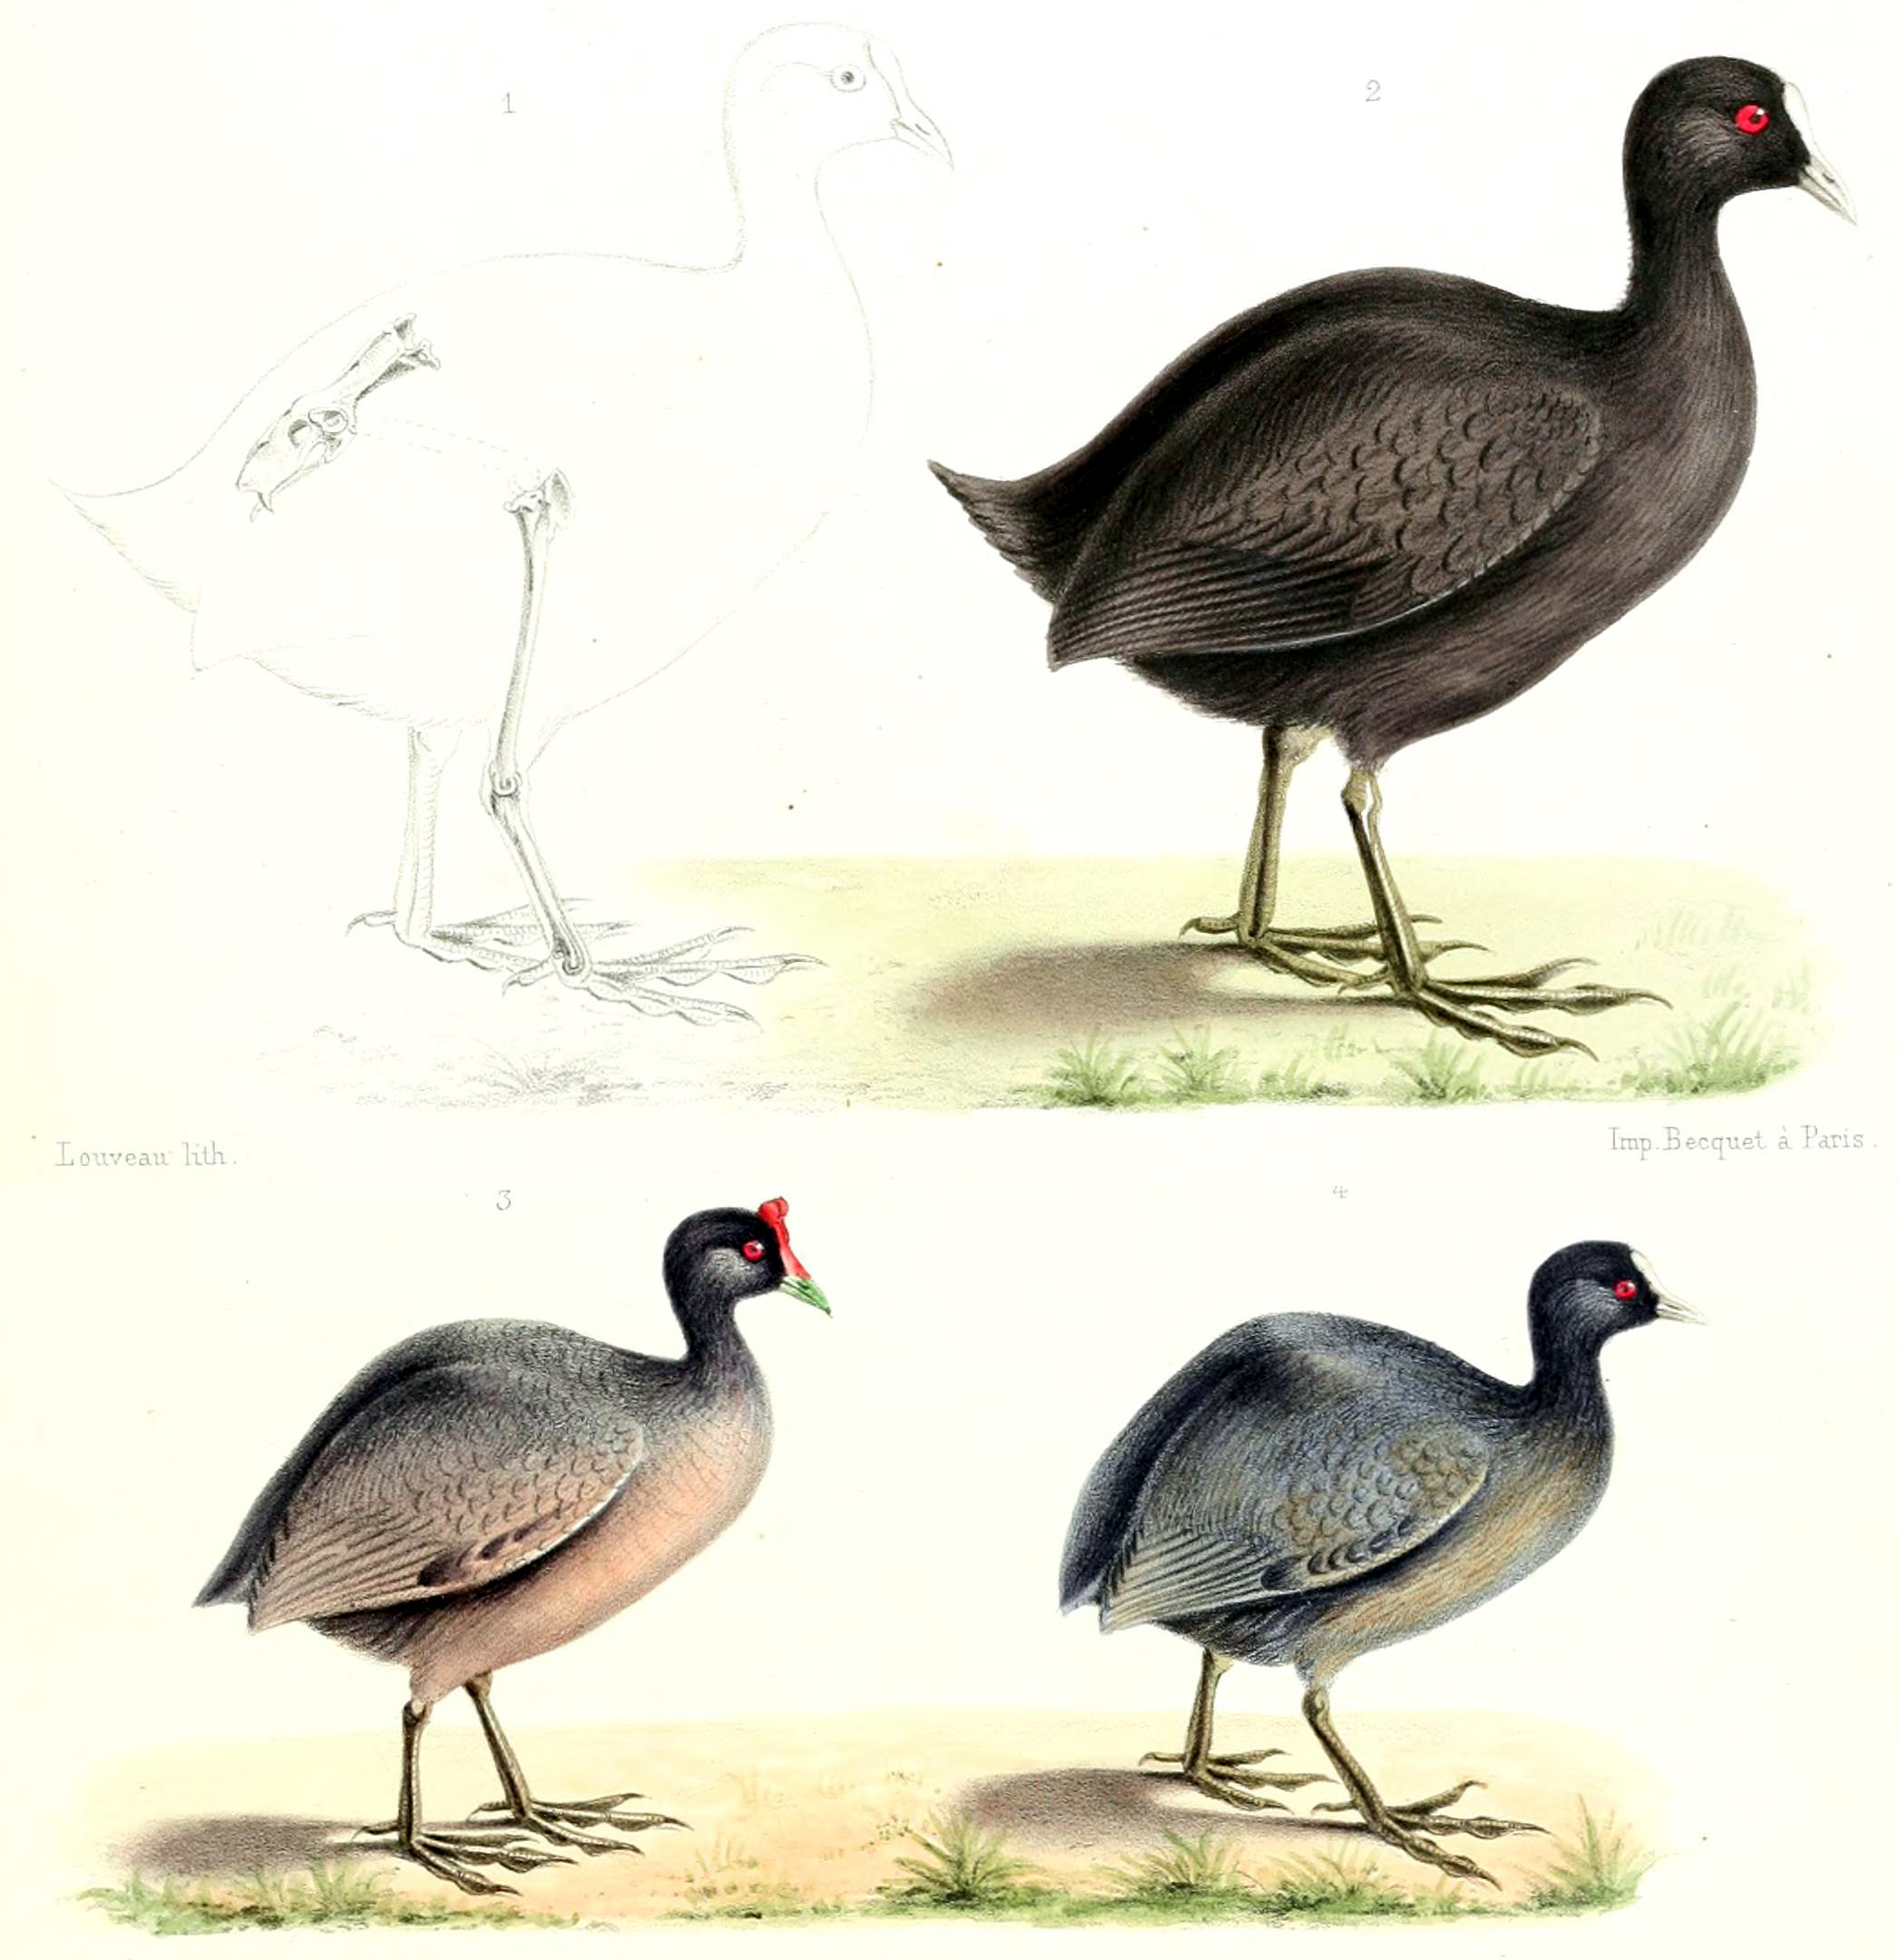 Mascarene coot 'Fulica newtoni' a large dark-gray waterbird with red eyes, white bill and frontal shield, and broad toes without webbing; illustration from Alphonse Milne-Edwards